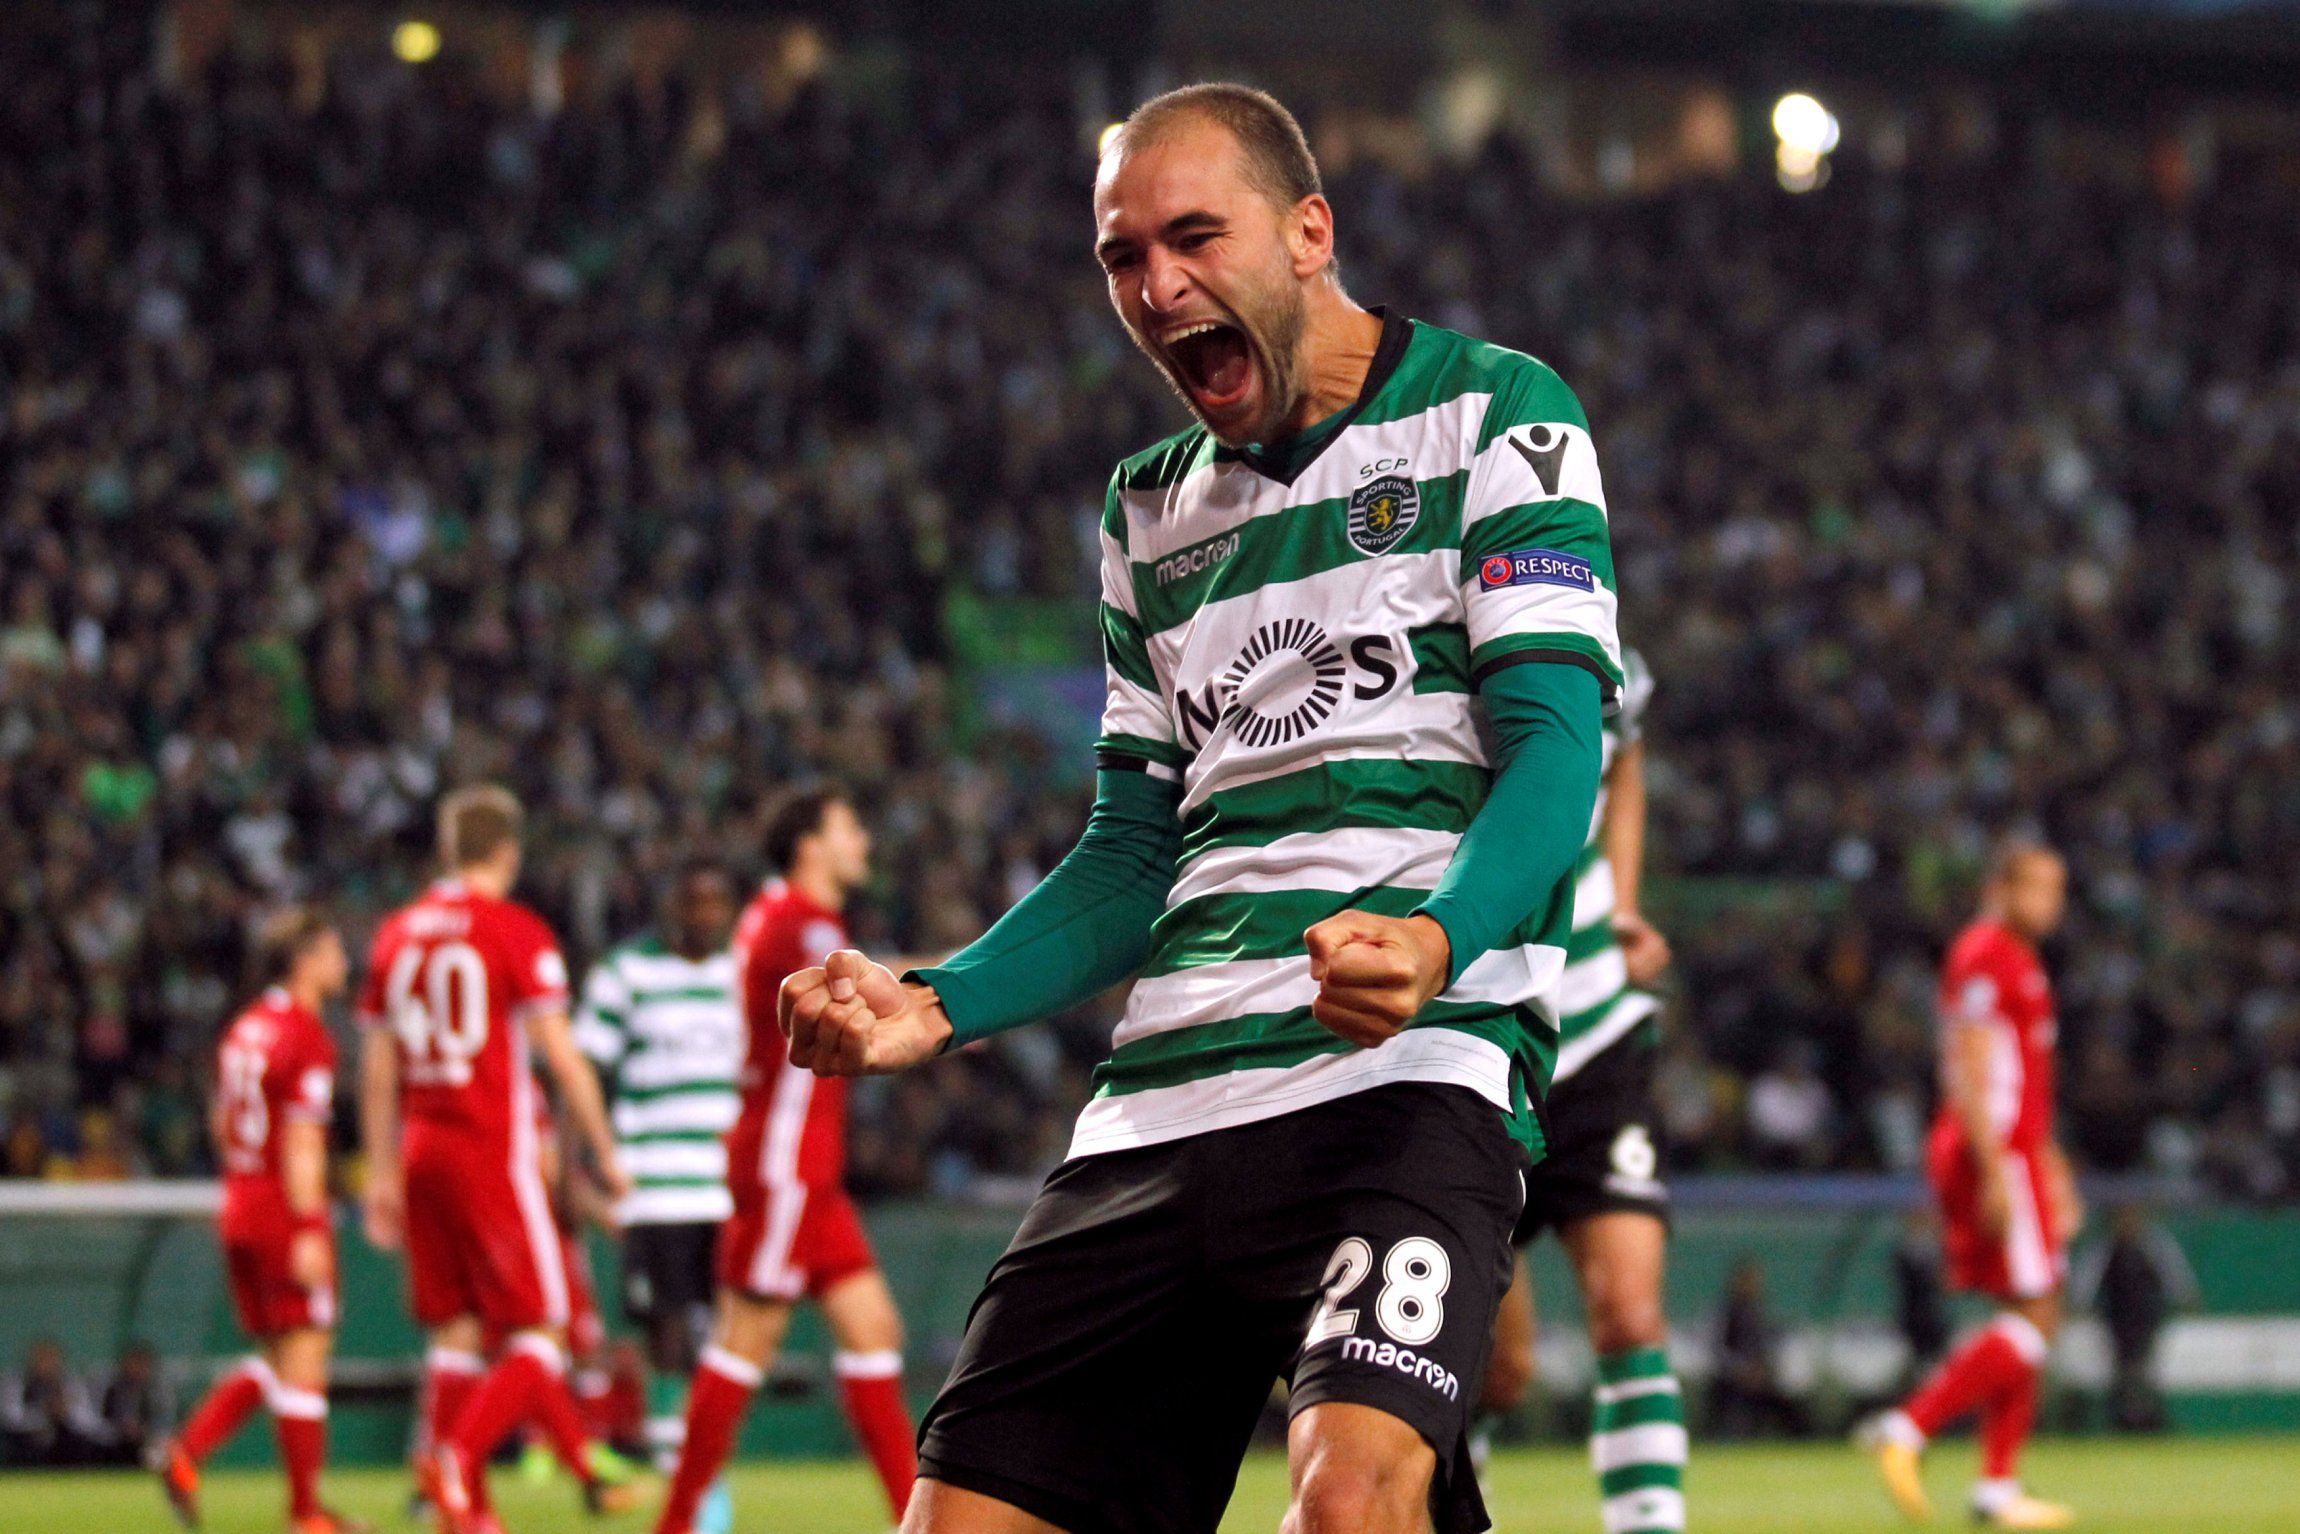 Bas Dost celebrates scoring for Sporting in the Europa League